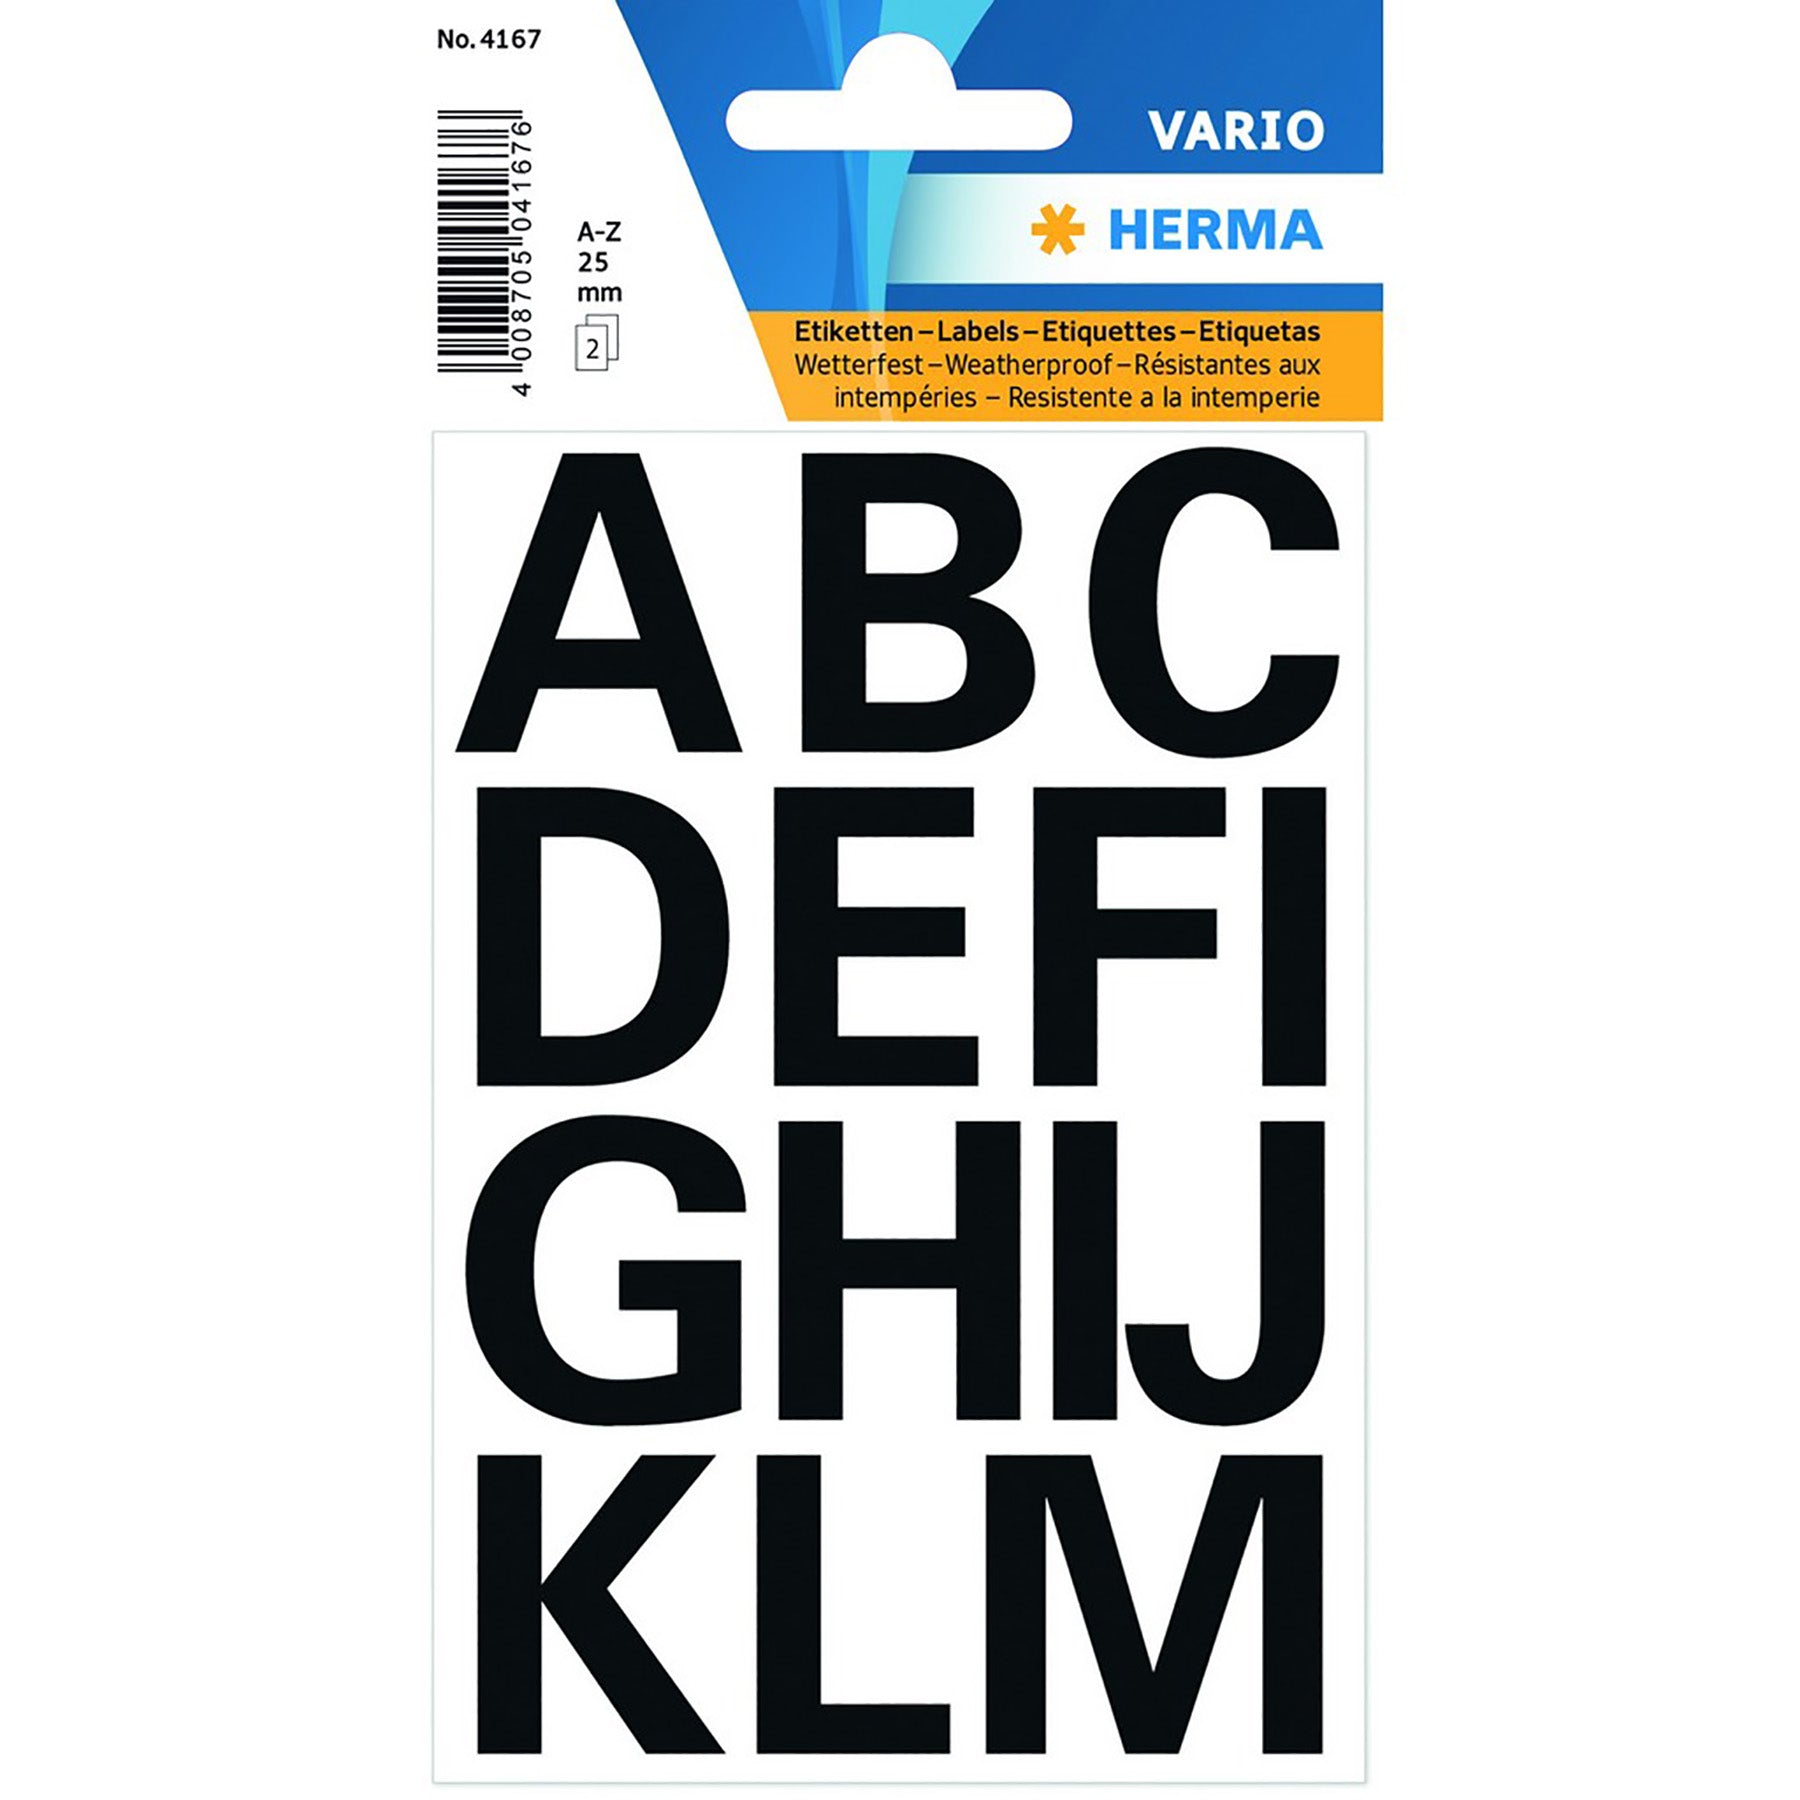 Herma Vario 2 Sheets Letters Black A to Z 0.98in each 